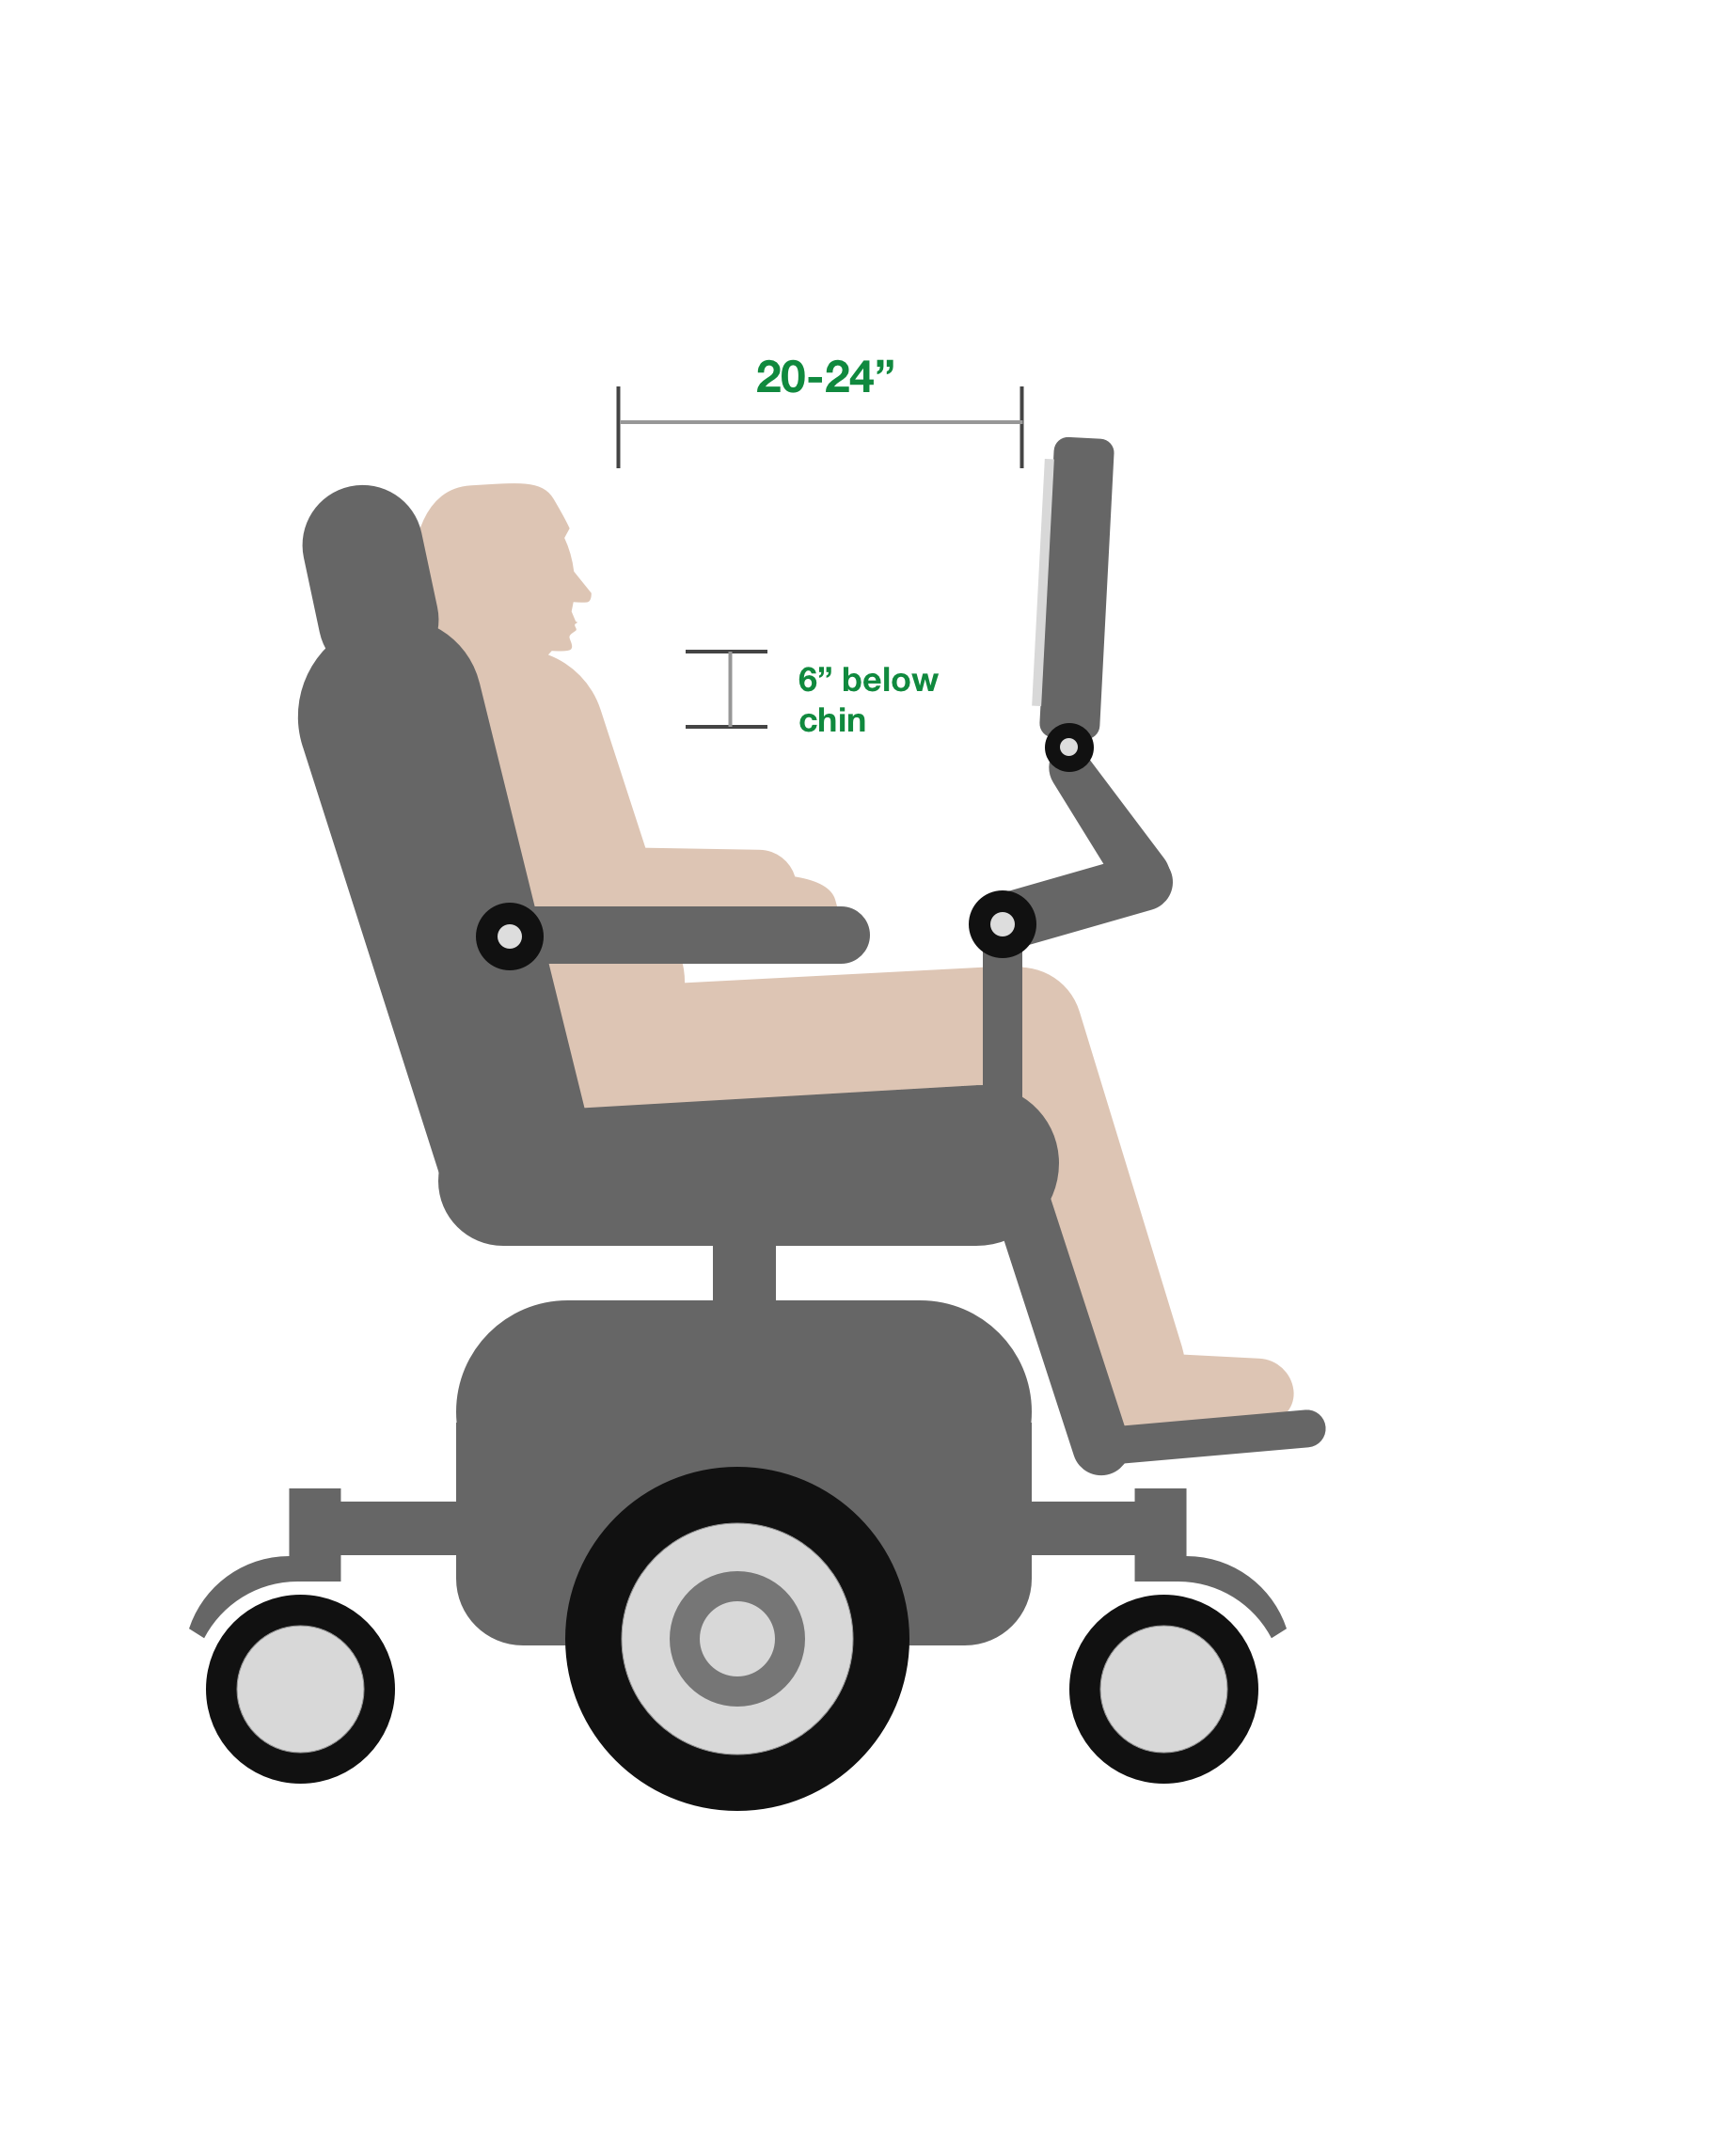 Positioning your tablet or AAC for Ability Drive